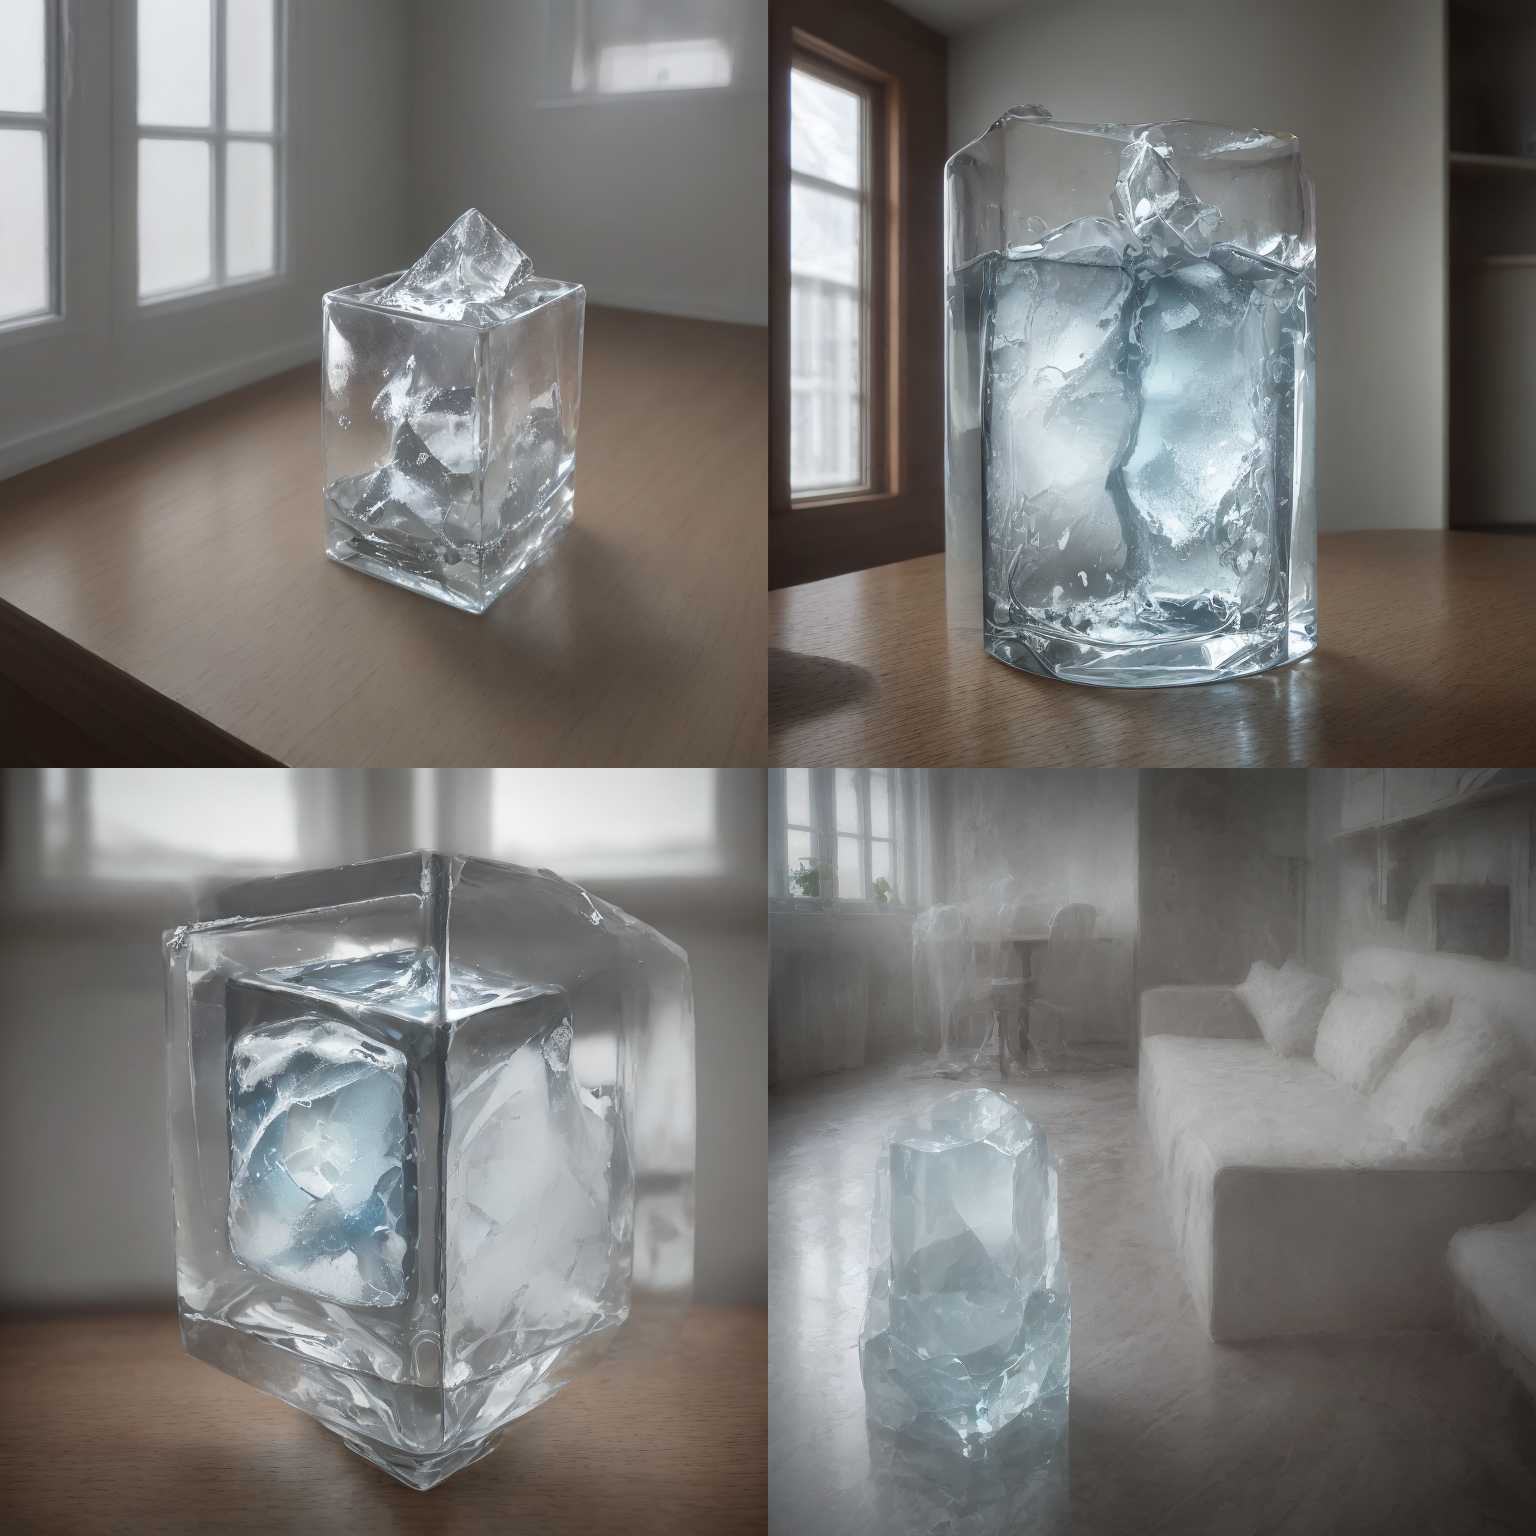 An ice cube in a warm room